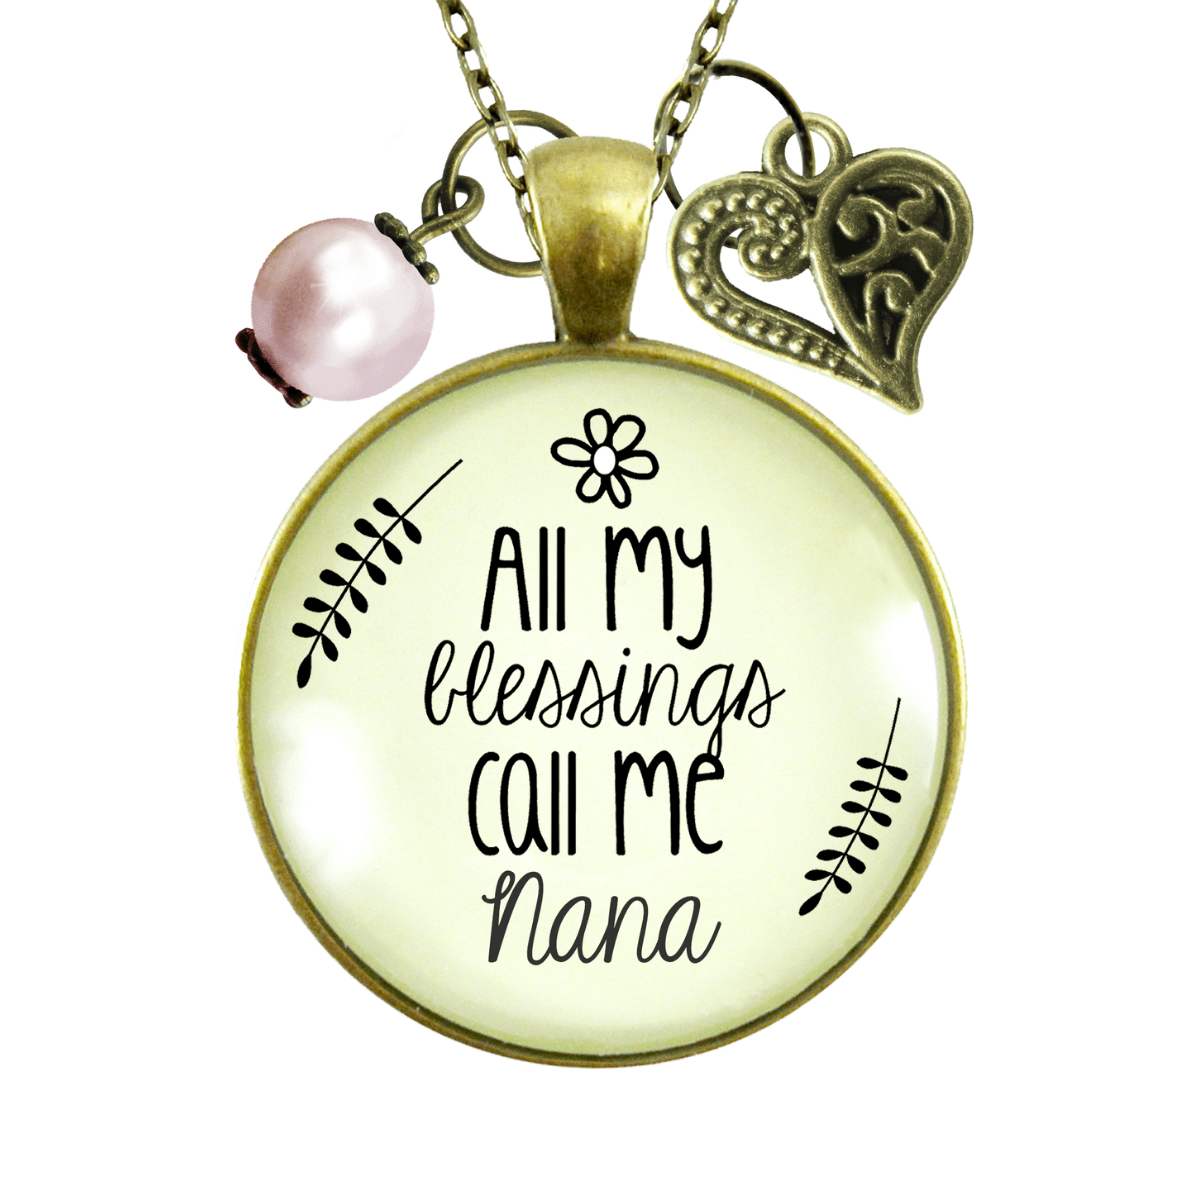 Gutsy Goodness Nana Necklace All My Blessings Southern Grandma Womens Family Gift Jewelry - Gutsy Goodness Handmade Jewelry;Nana Necklace All My Blessings Southern Grandma Womens Family Gift Jewelry - Gutsy Goodness Handmade Jewelry Gifts